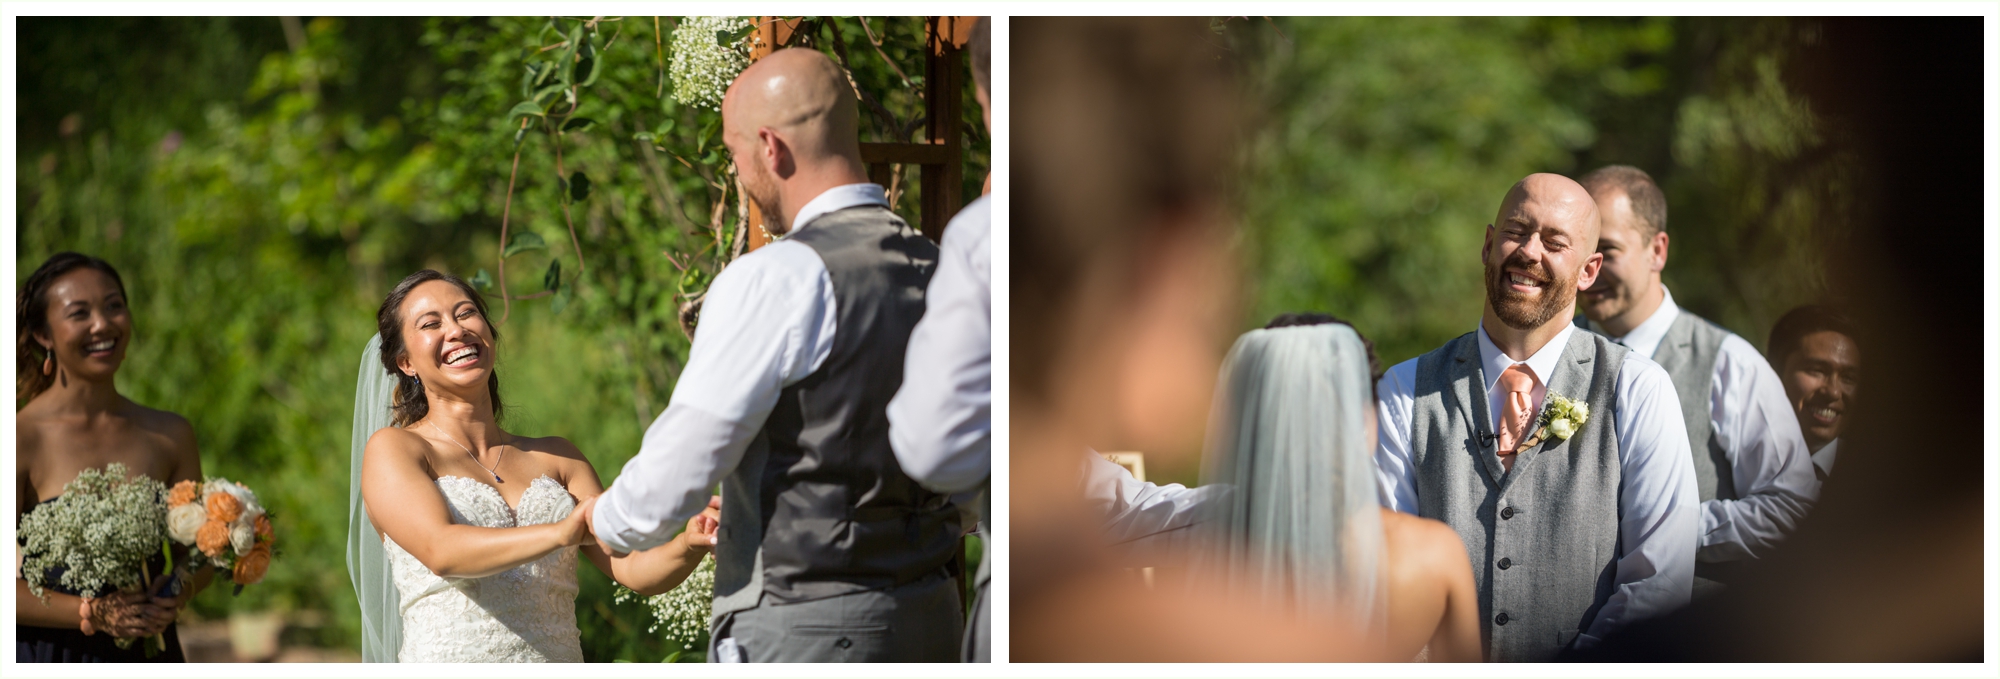 sweet moments of bride and groom laughing during wedding ceremony at stone mountain lodge in lyons colorado